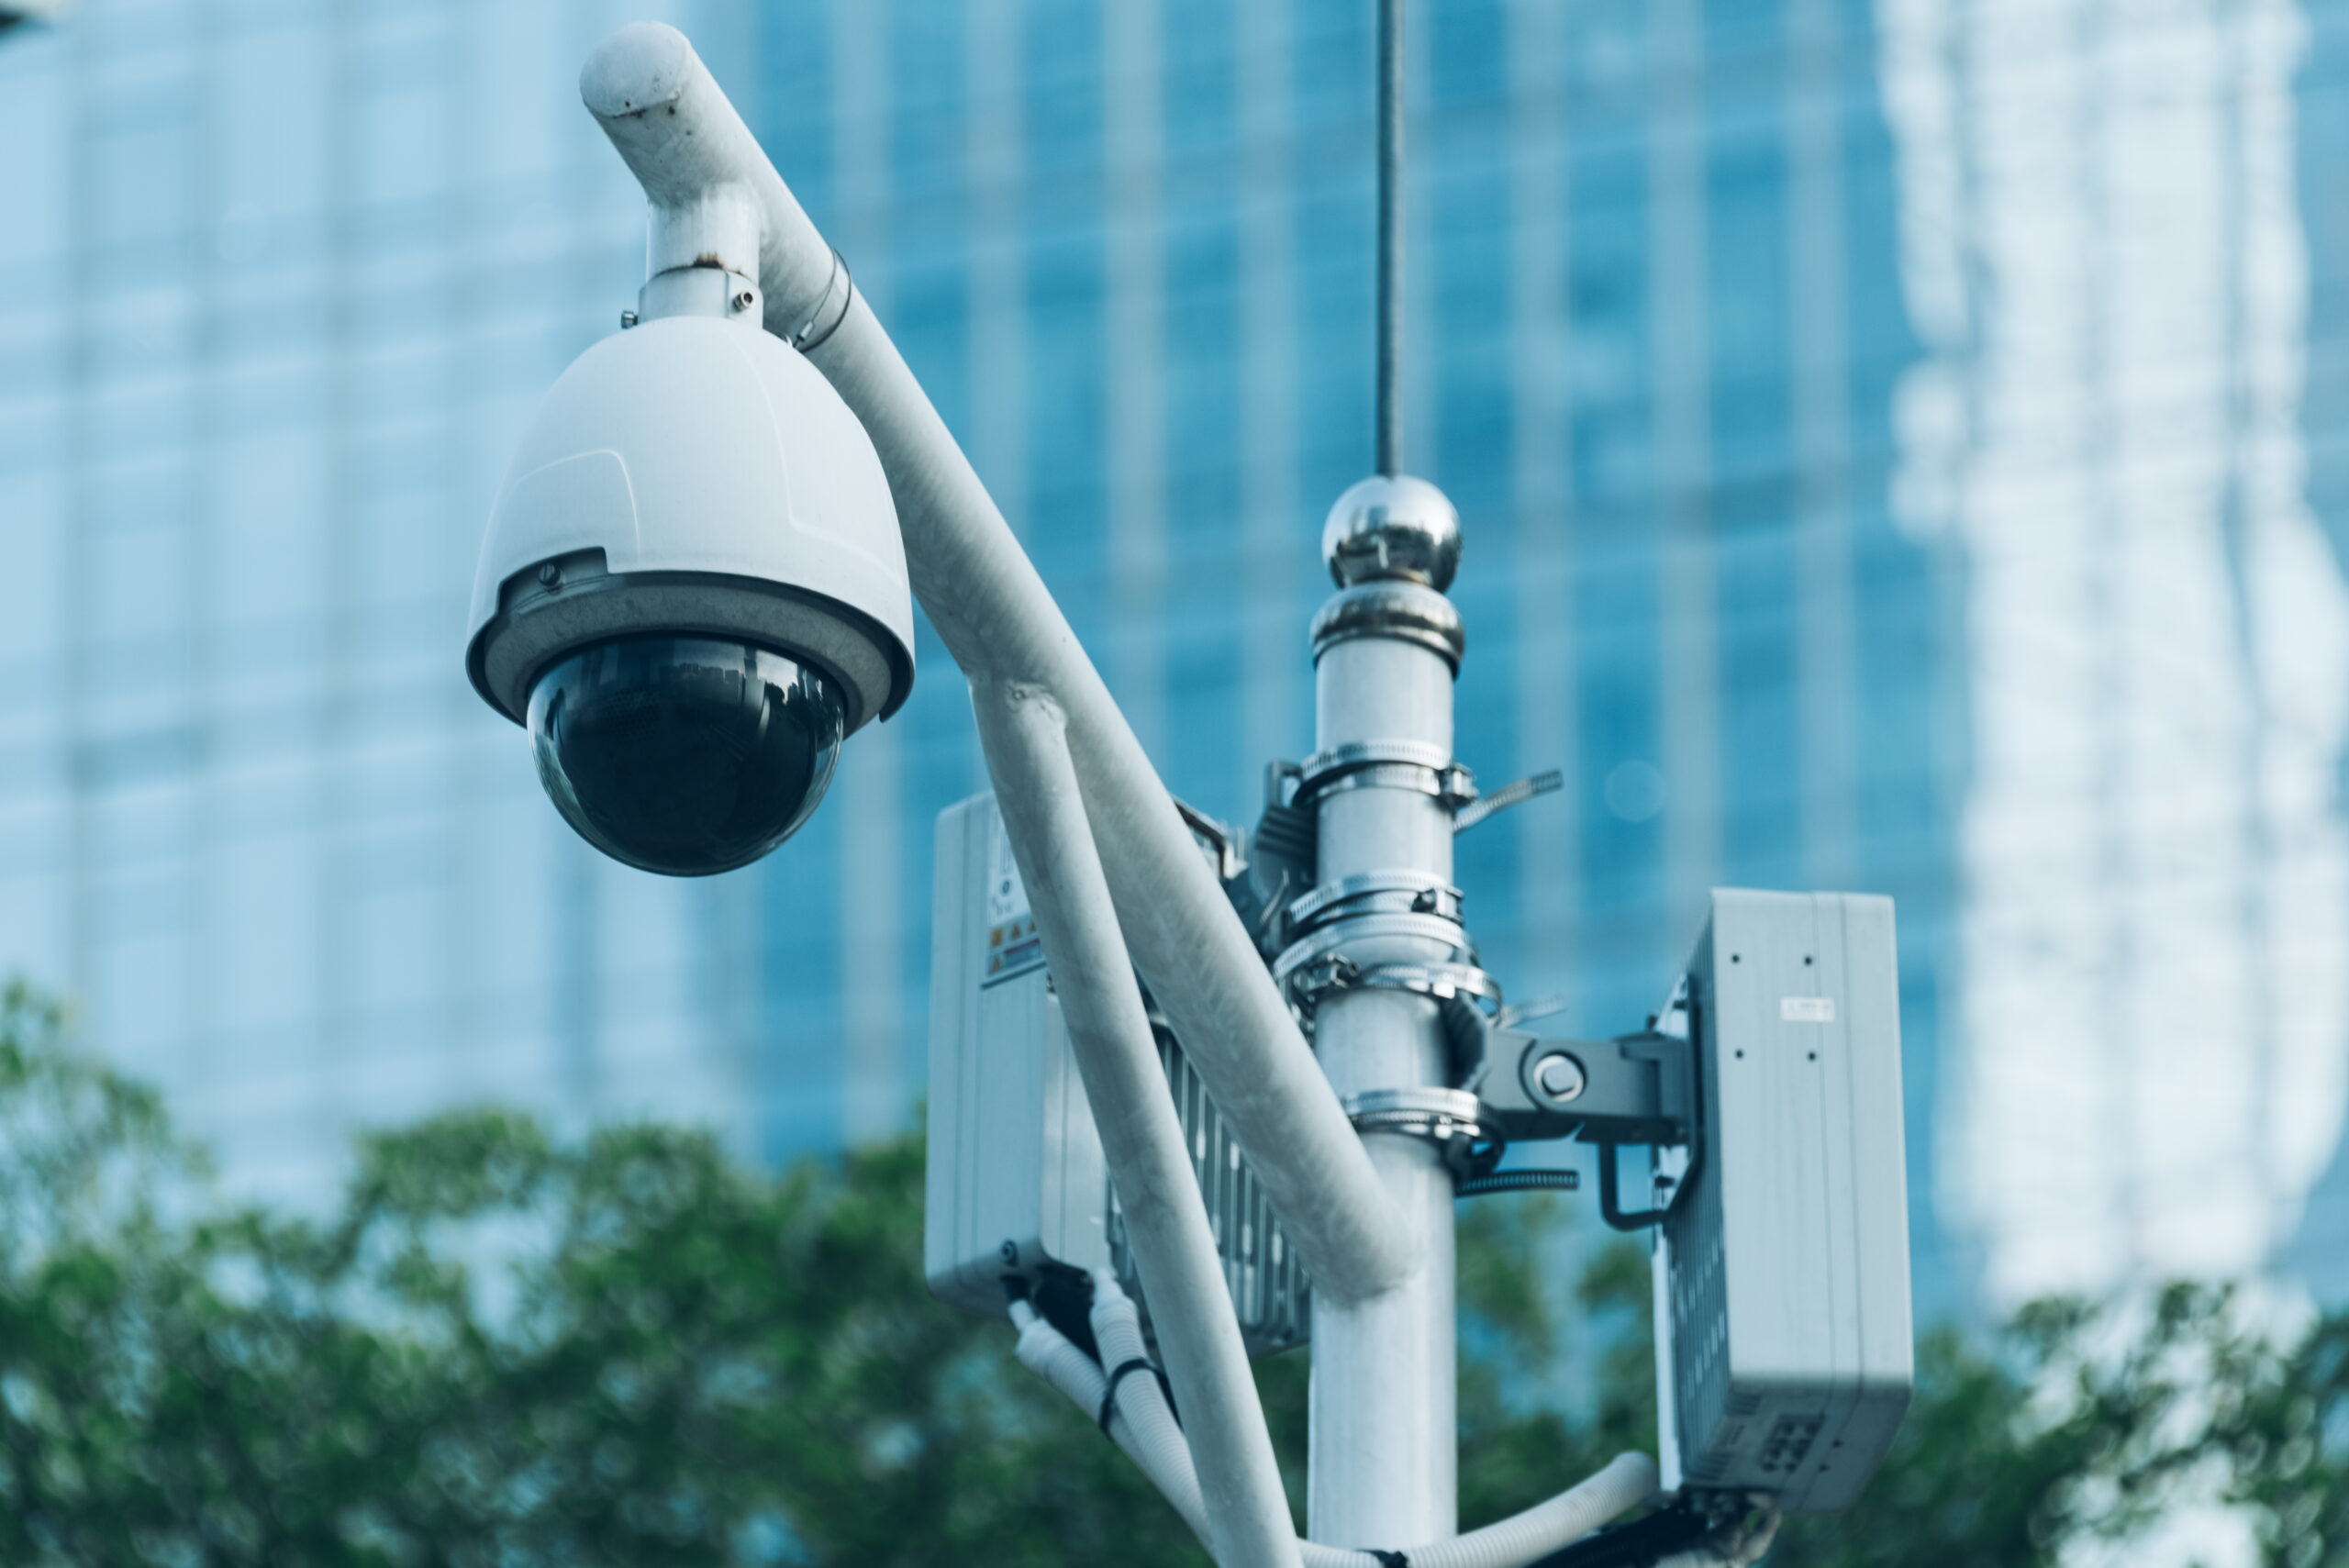 Making The Switch? Avoid These Top 5 Mistakes In IP Camera Deployment